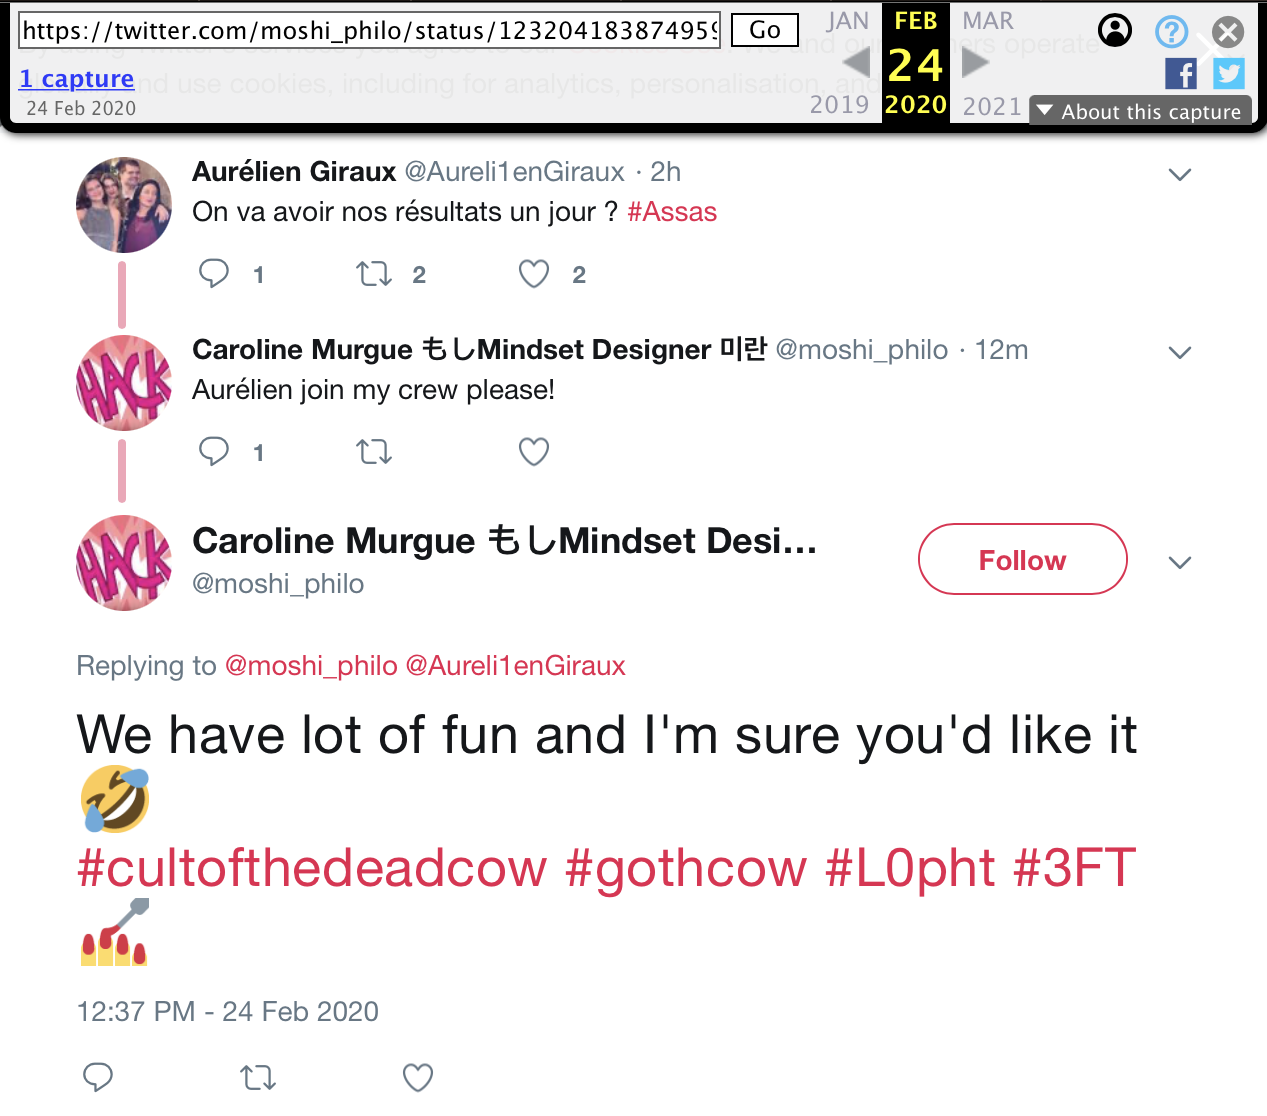 24 Feb 2020 tweet from @moshi_philo: We have a lot of fun and I'm sure you'd like it #cultofthedeadcow #gothcow #L0pht #3FT